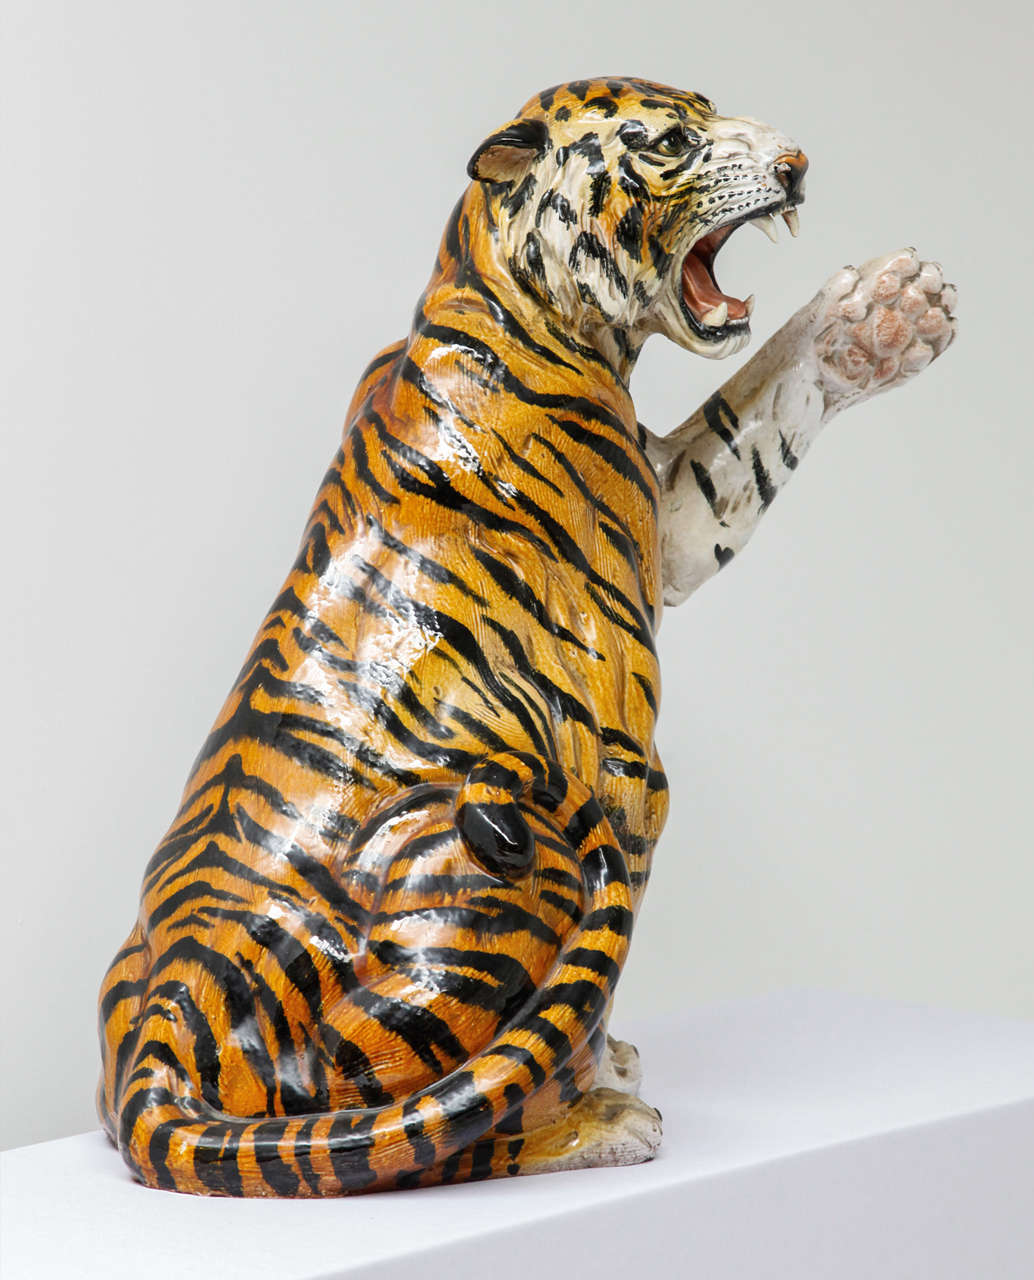 Dynamic Tiger Sculpture in Ceramic with a colorful glaze, made in Italy, 1970's.